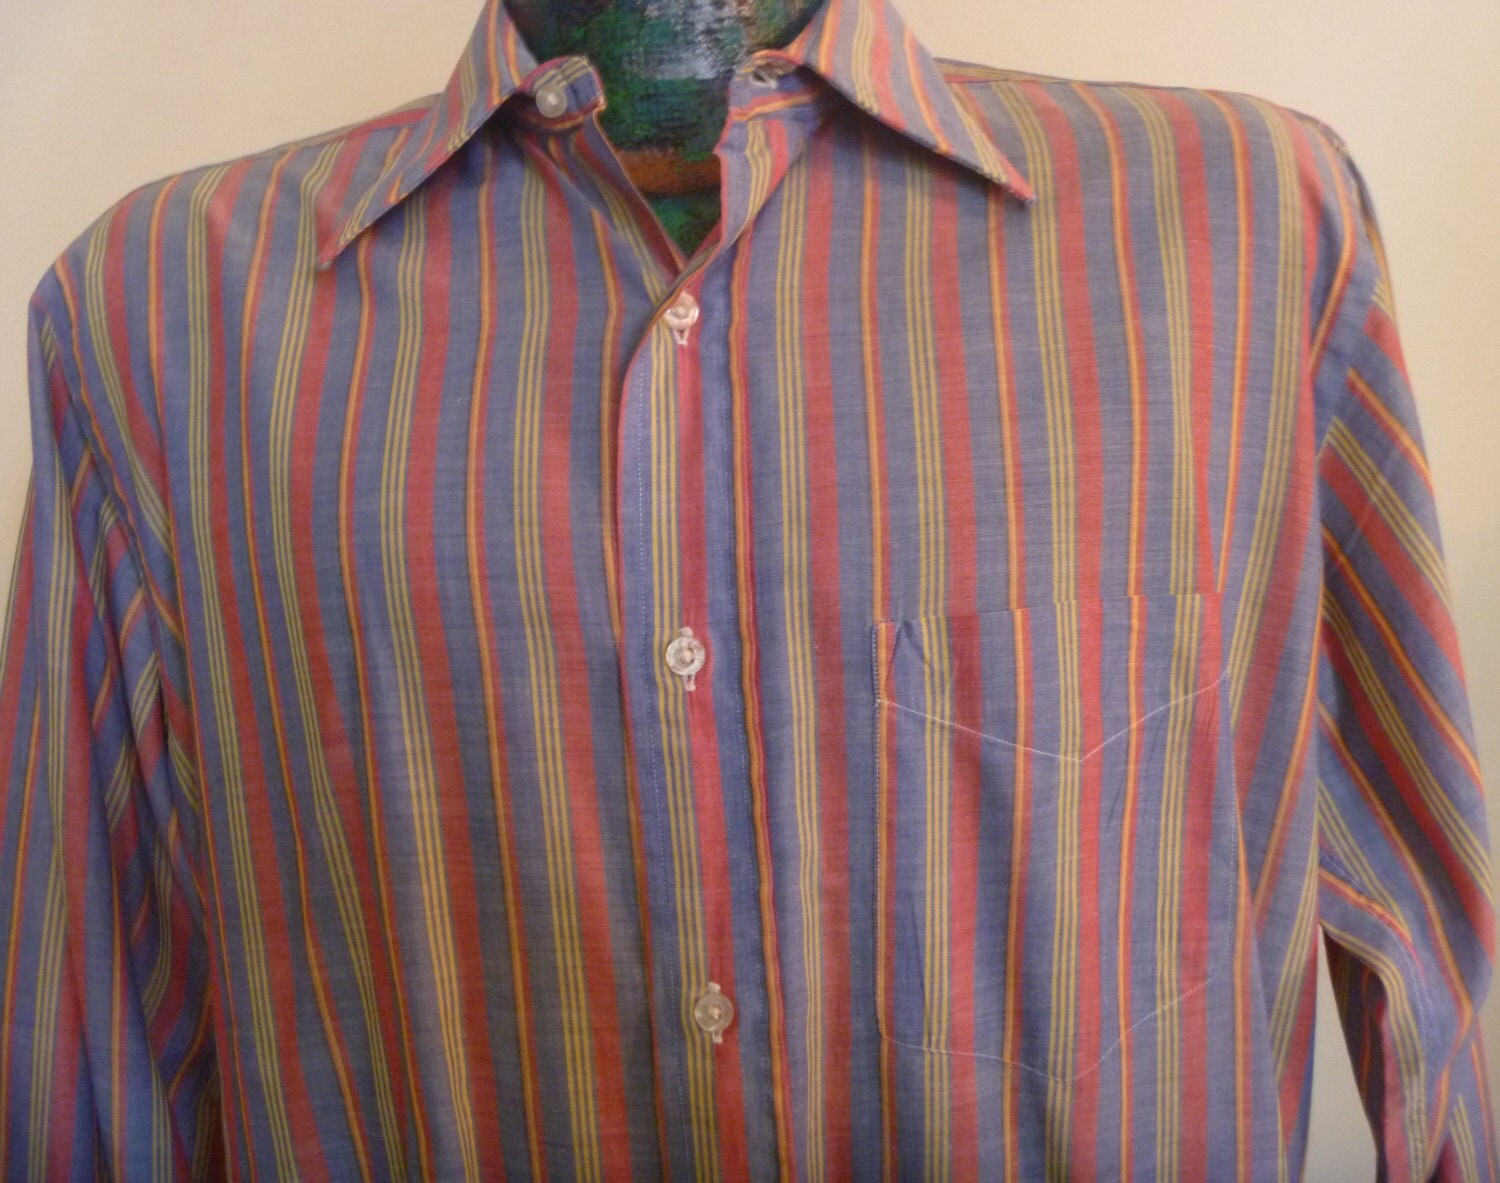 70s Men's Long Sleeve Striped Button Down Shirt Large